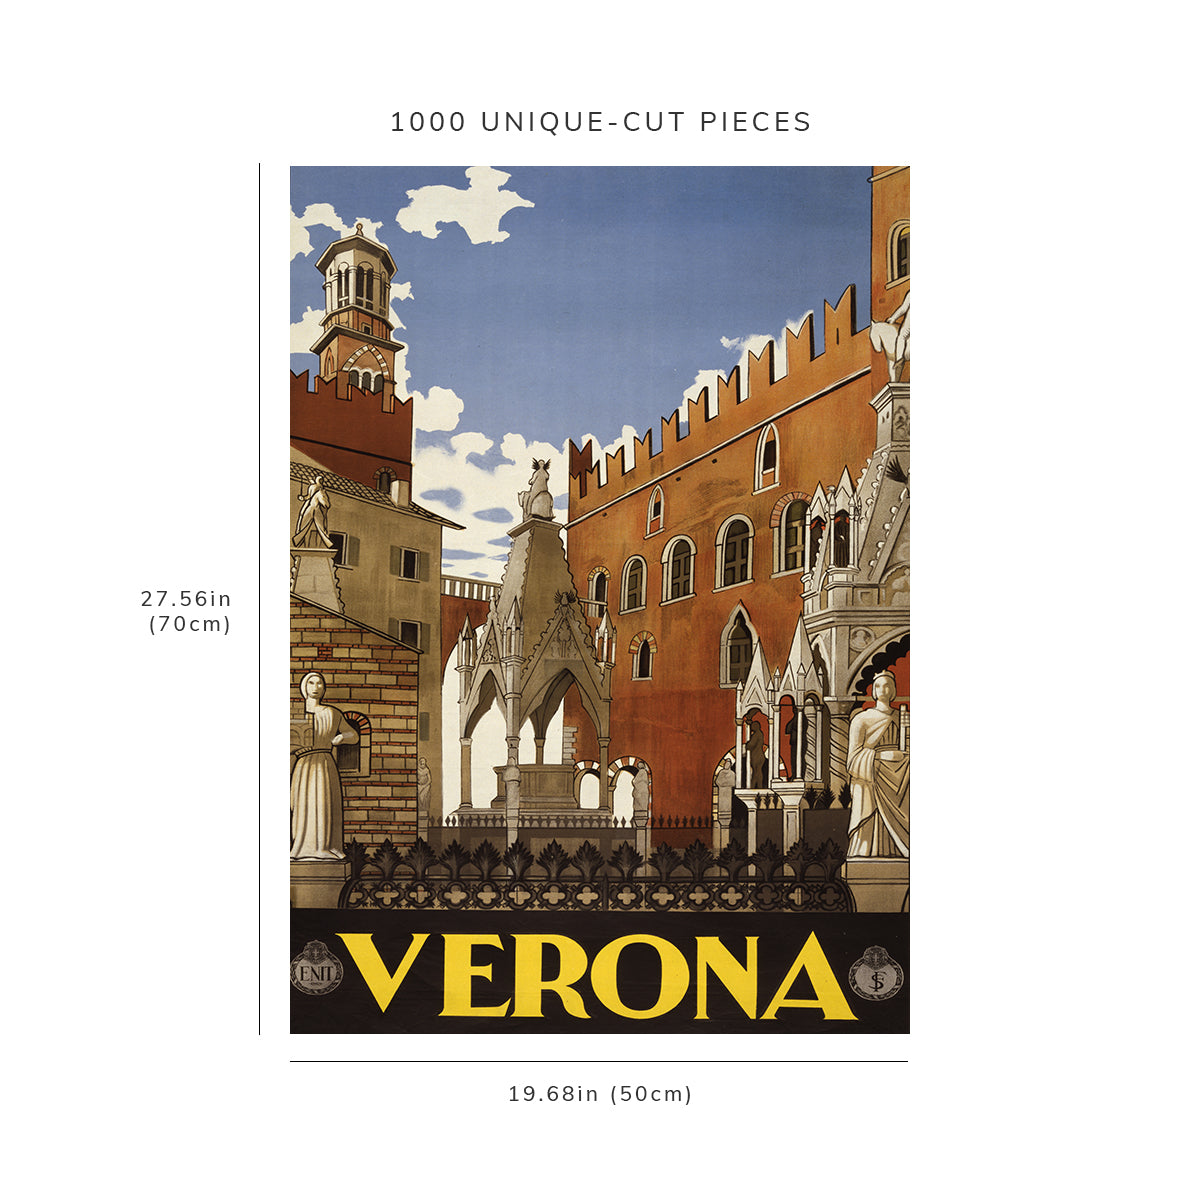 1000 piece puzzle - 1938 Photo: Verona Poster showing buildings and monuments | Birthday Present Gifts